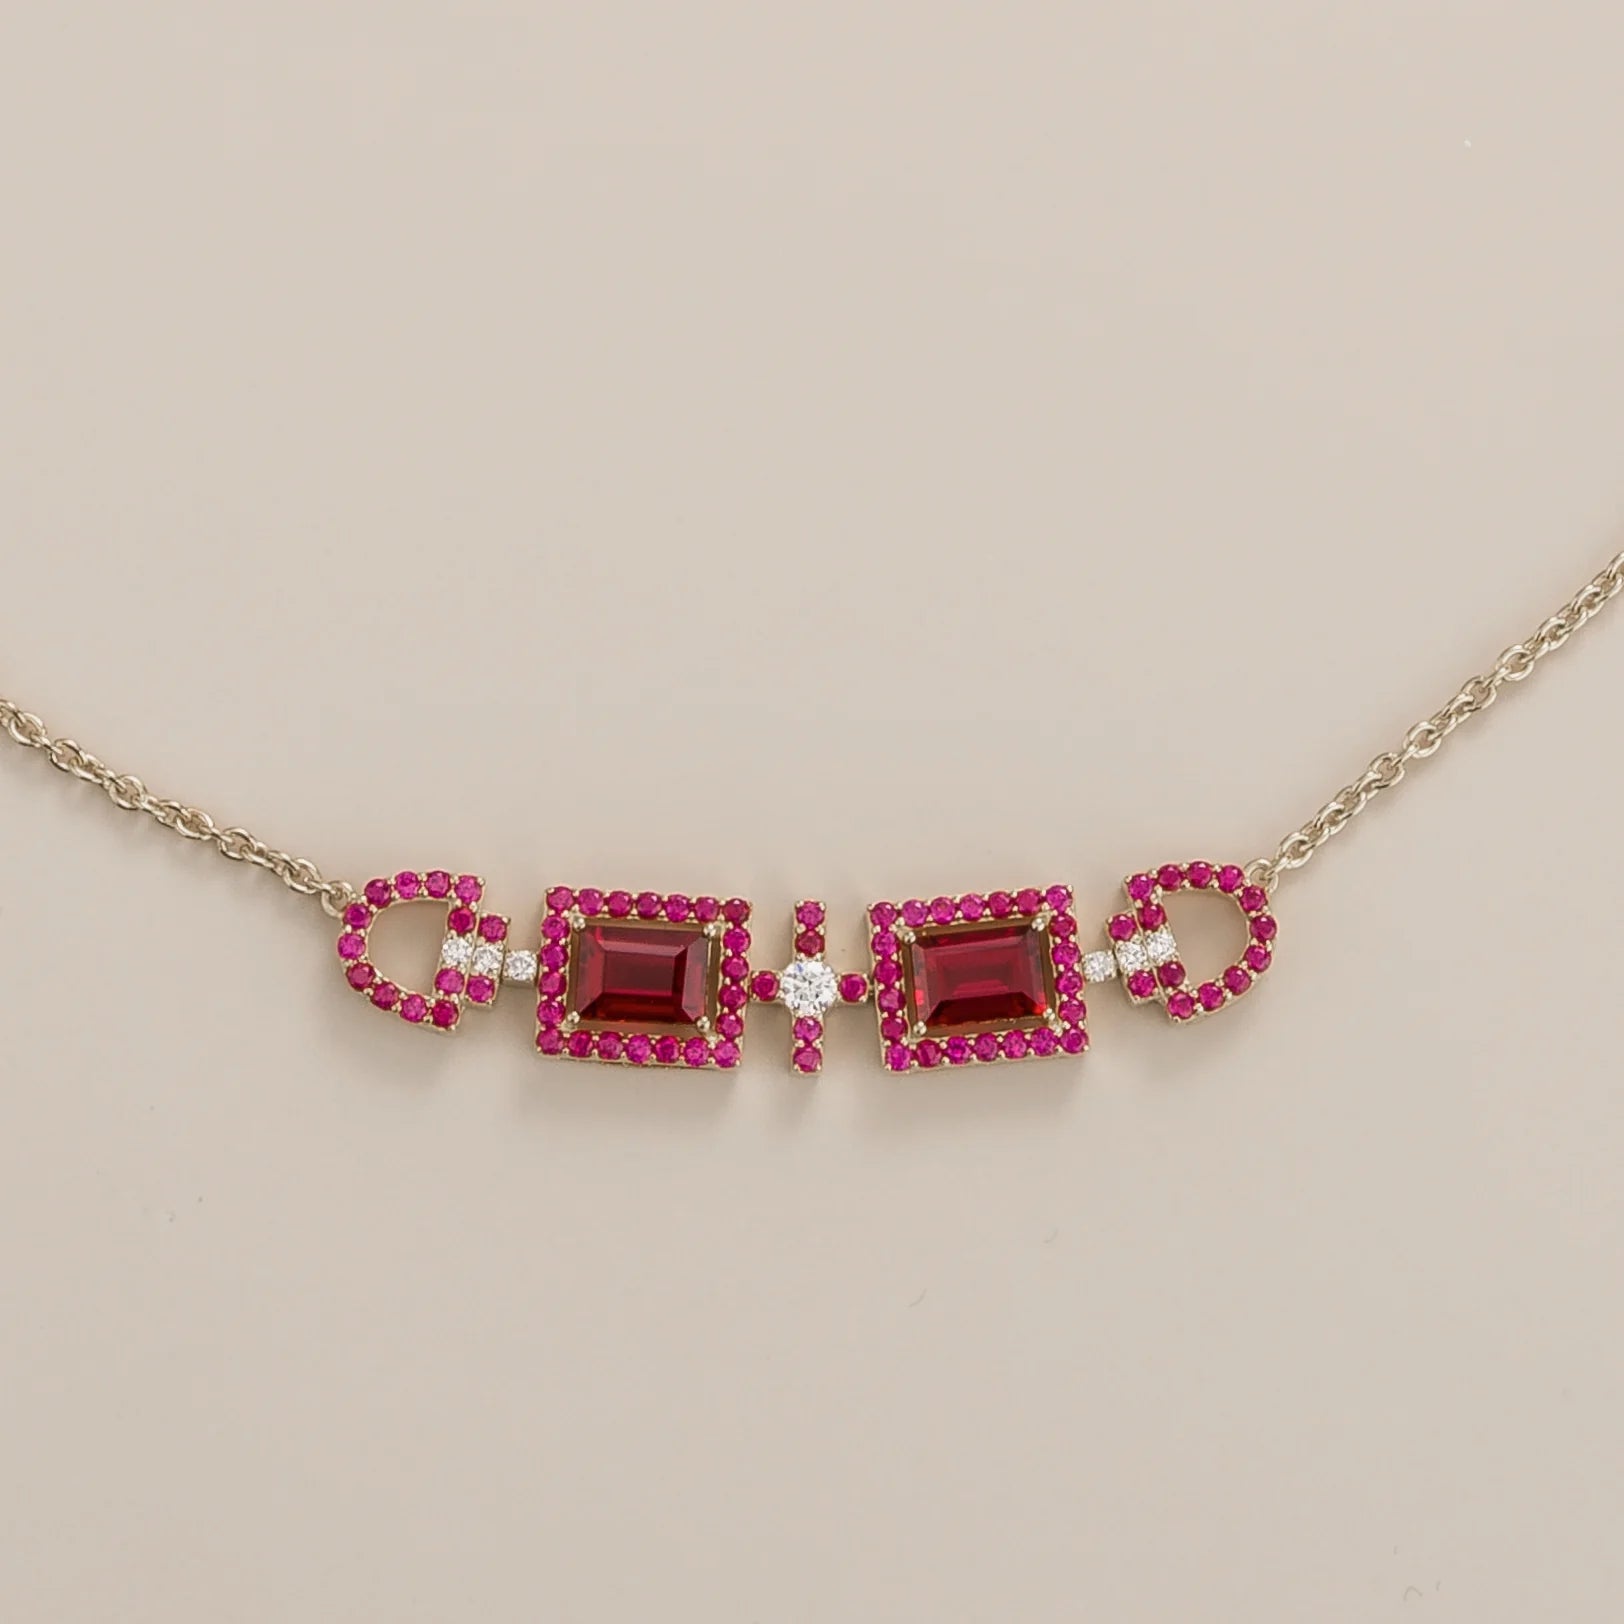 Ruby Necklace Juvetti Jewellery London Ciceris White Gold Necklace Ruby and Diamond